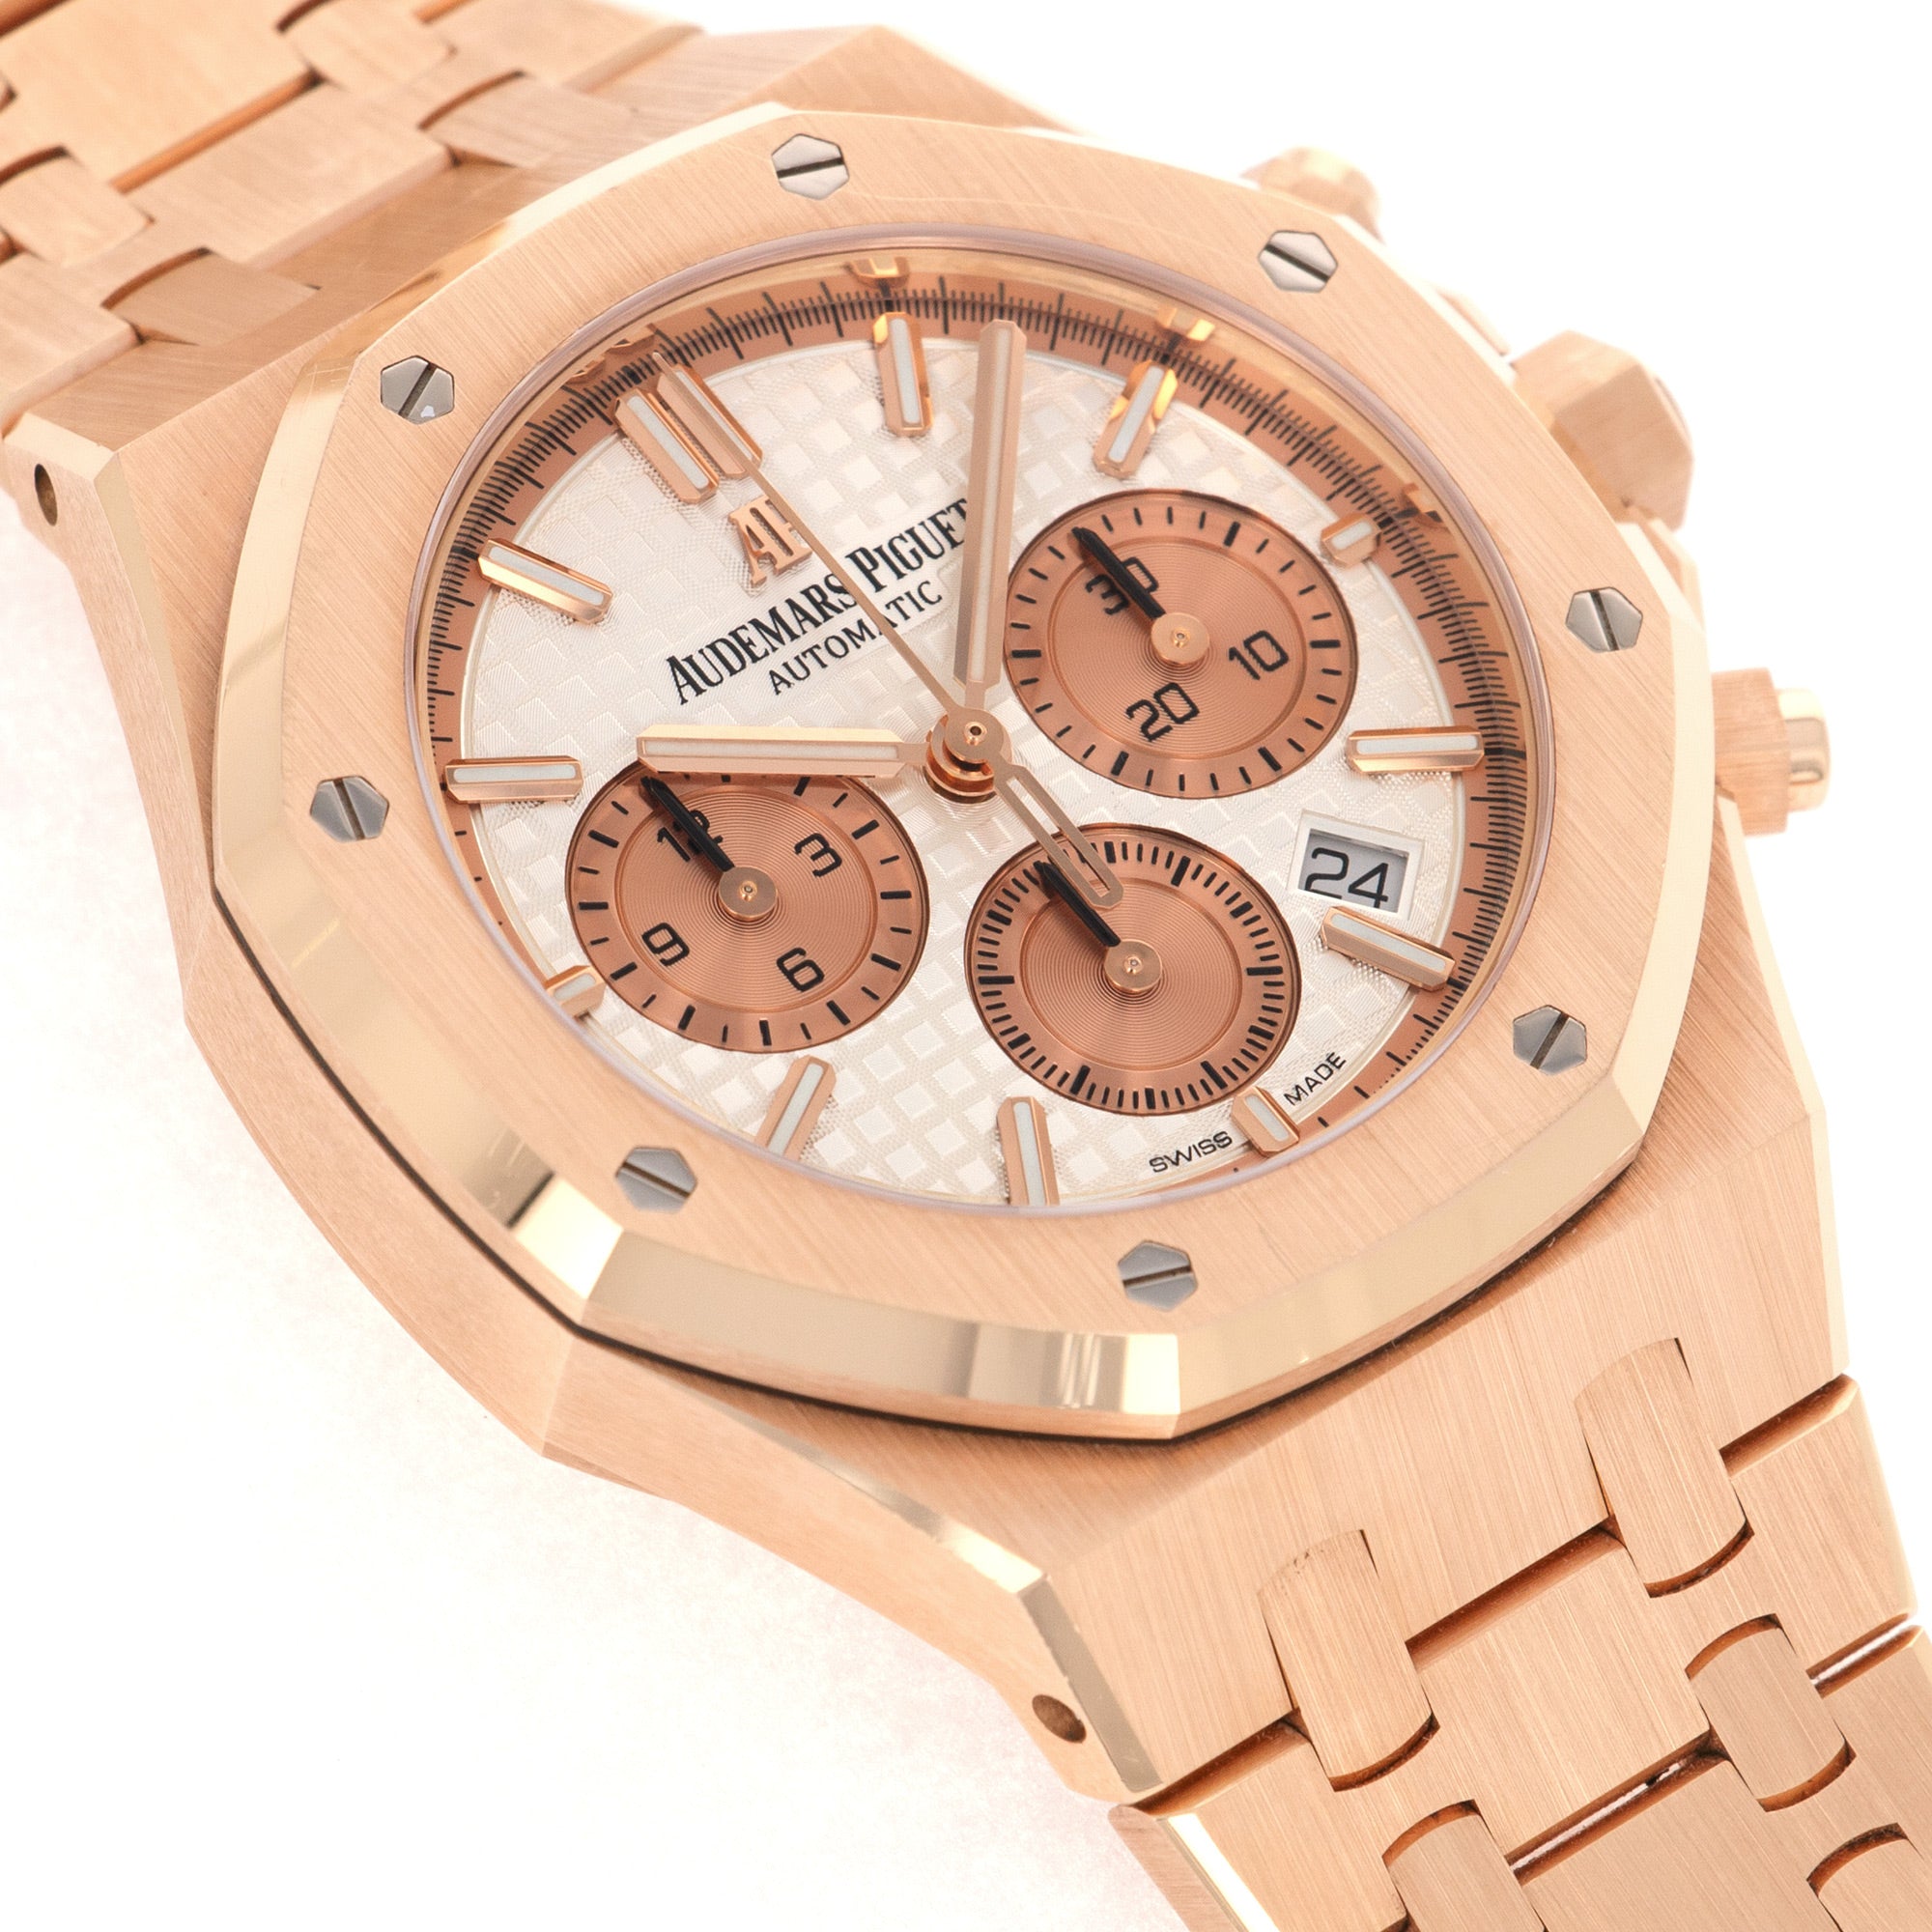 Audemars Piguet Royal Oak Chrono 26315OR.OO.1256 18k RG  Excellent Overall Condition, No Notable Signs of Wear Unisex 18k RG Silver 38 mm Automatic Current Rose Gold Original Warranty Card 